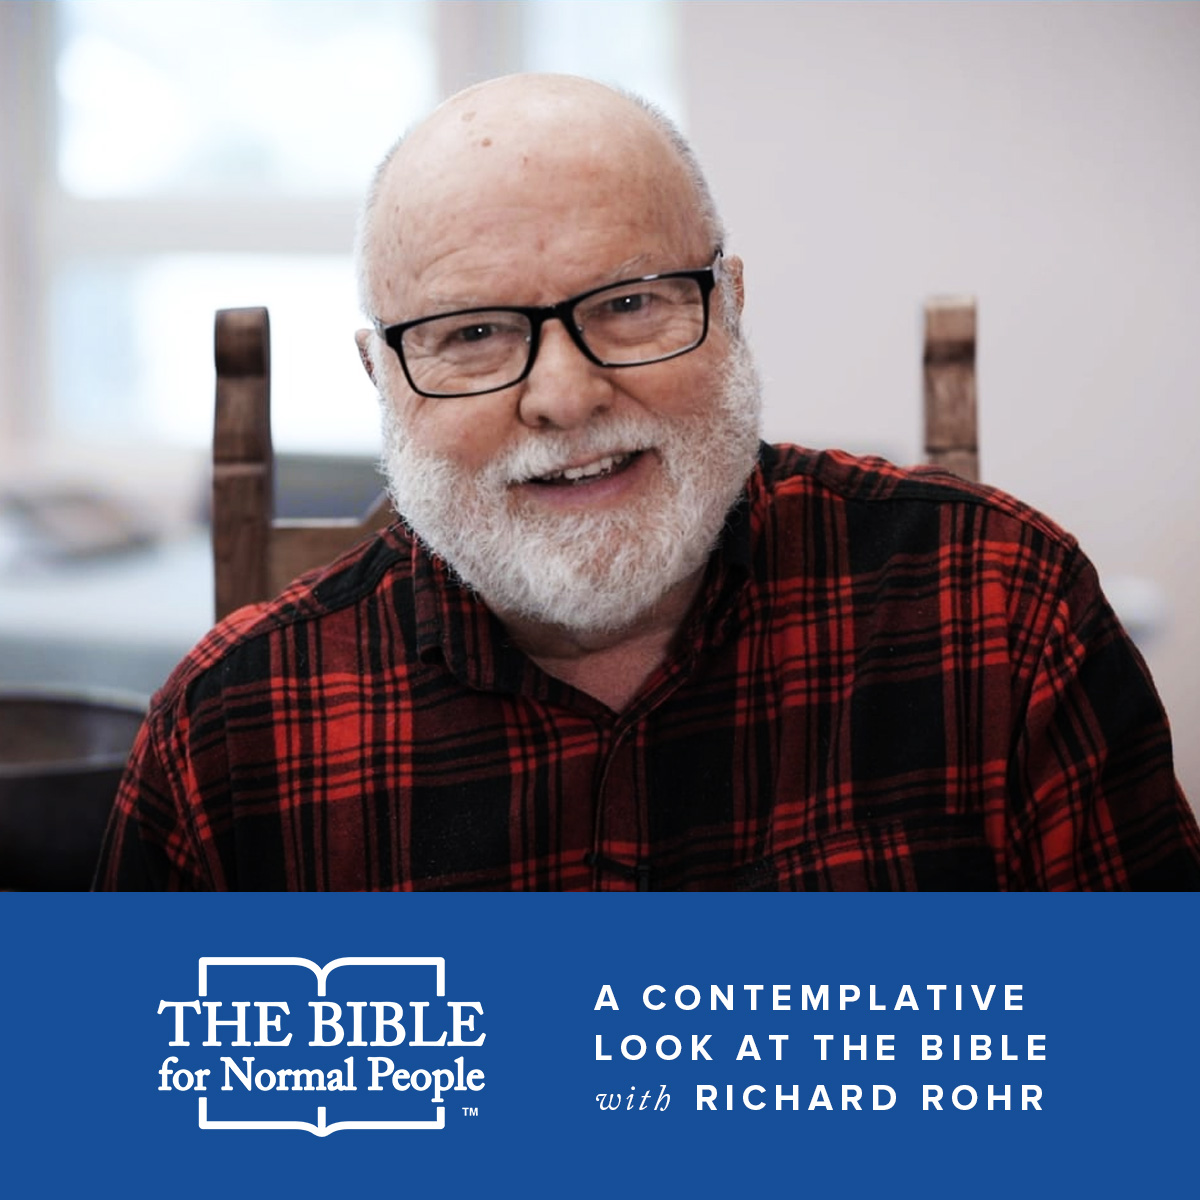 Interview with Richard Rohr: A Contemplative Look at The Bible